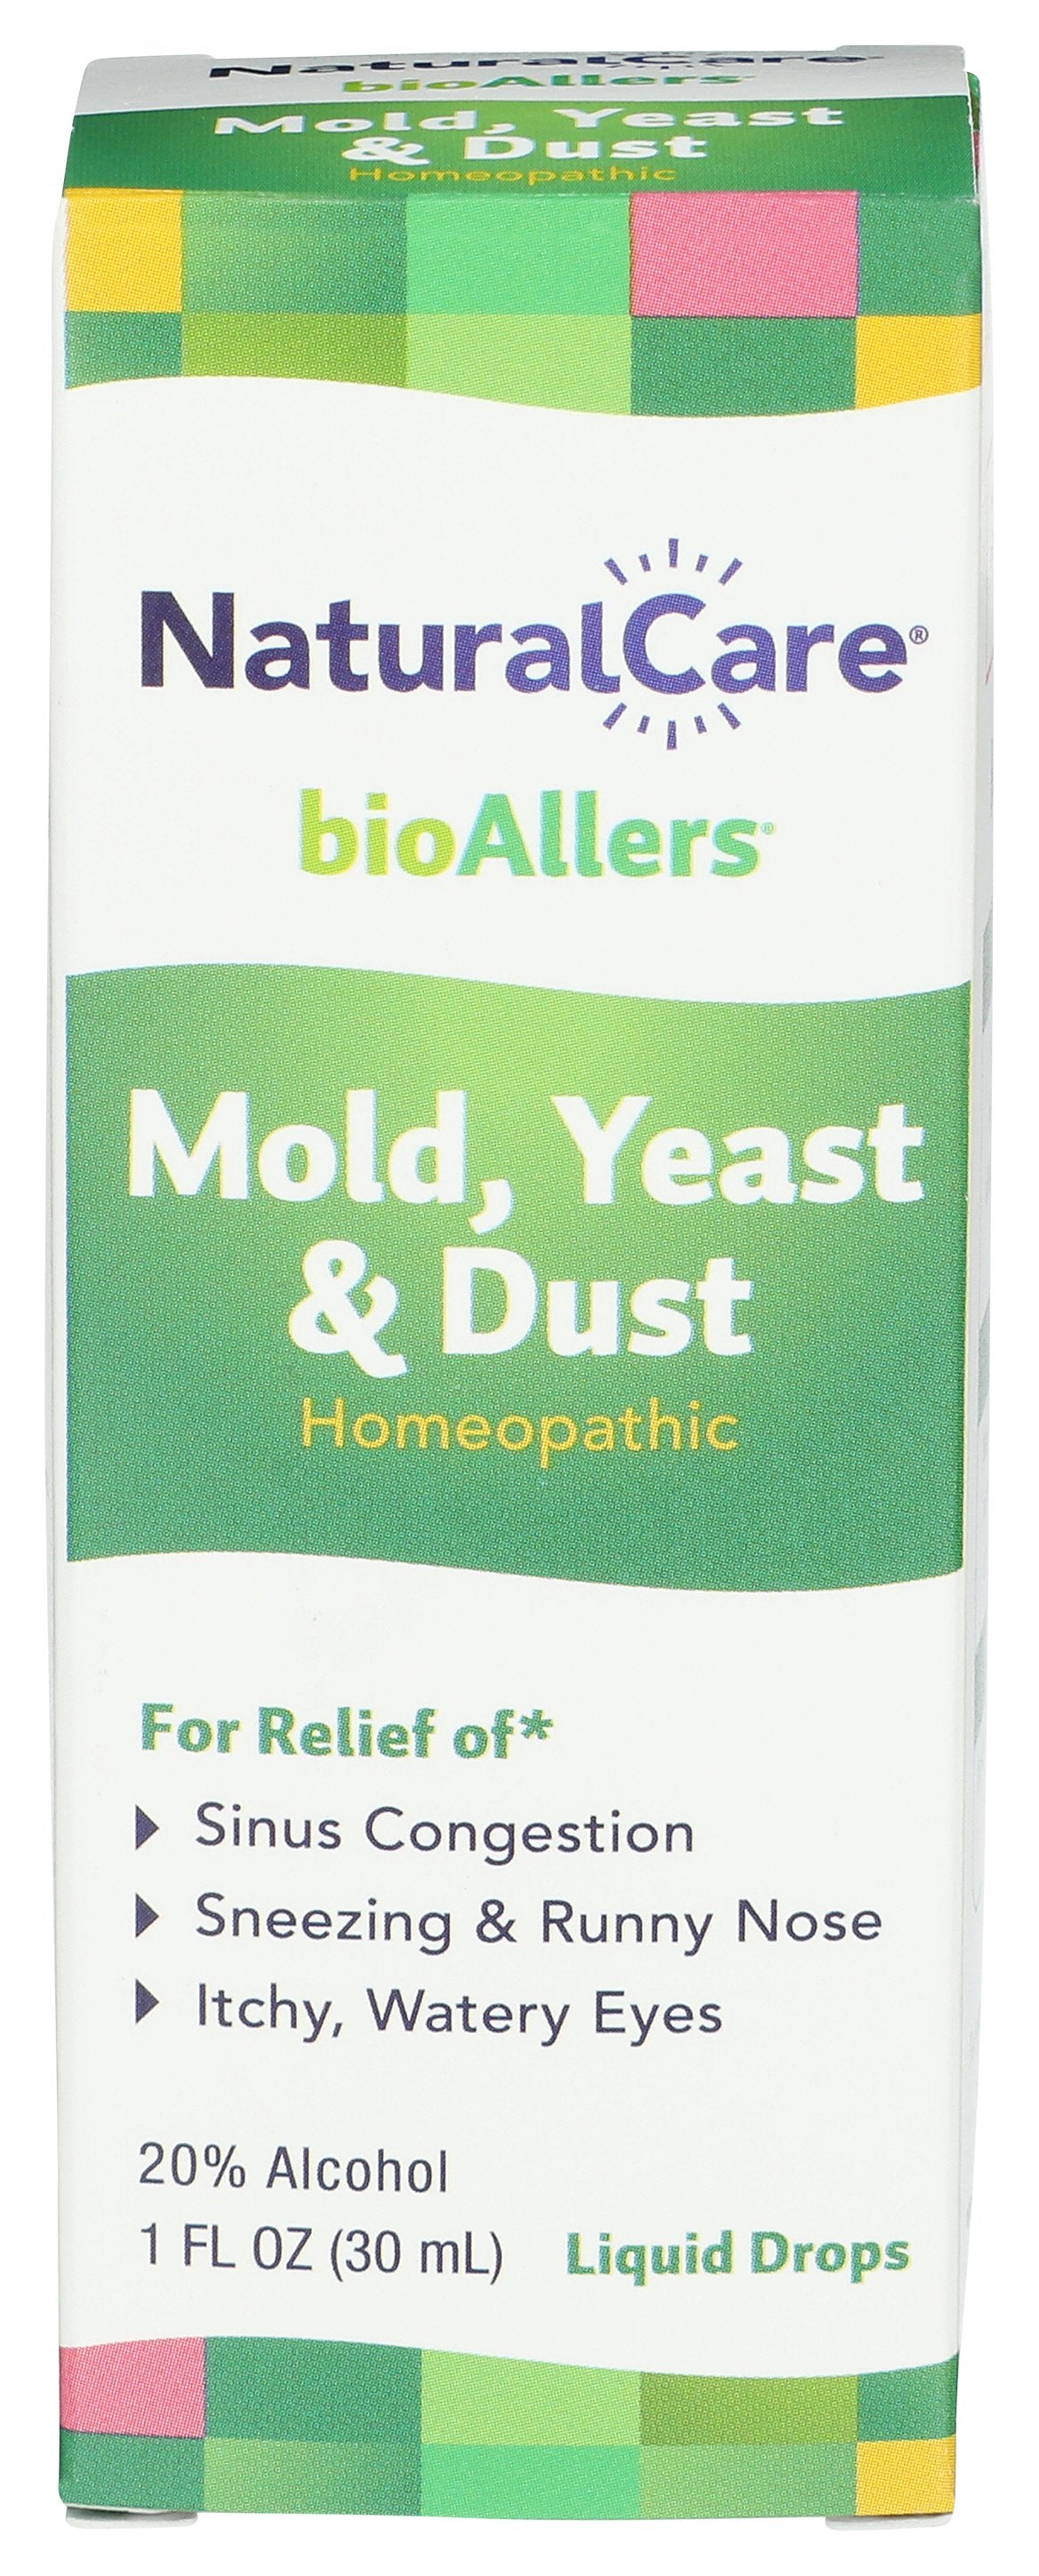 NATURALCARE ALLERGY MOLD YEAST DUST - Case of 3